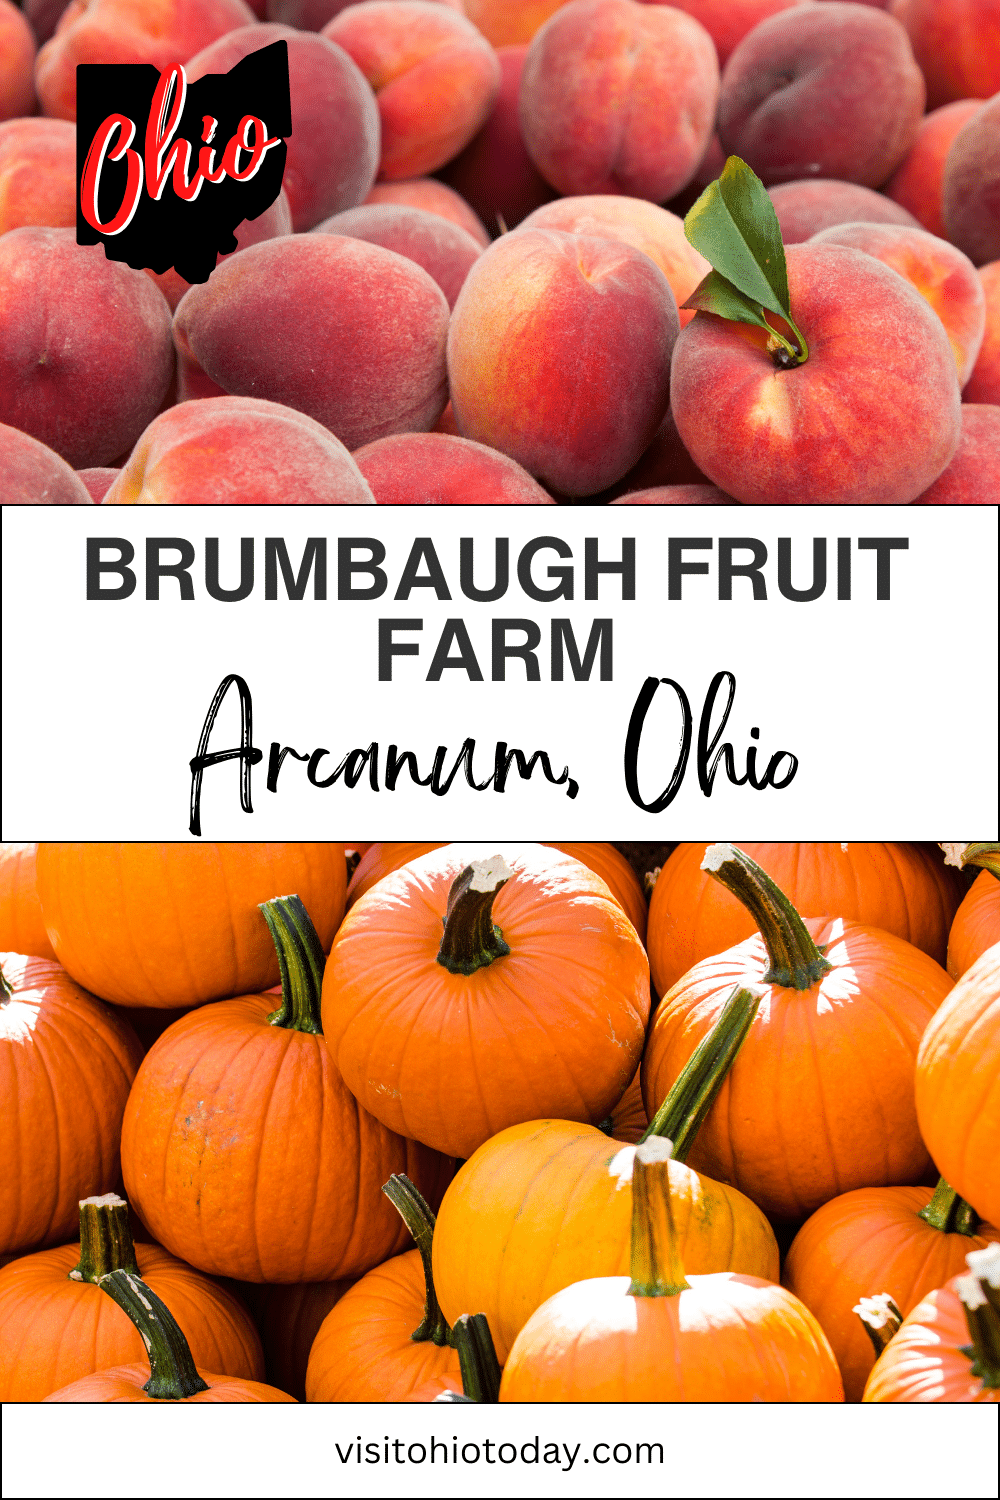 vertical image with a photo of a pile of peaches at the top, and a photo of orange pumpkins at the bottom. A white strip across the middle has the text Brumbaugh Fruit Farm Arcanum Ohio.